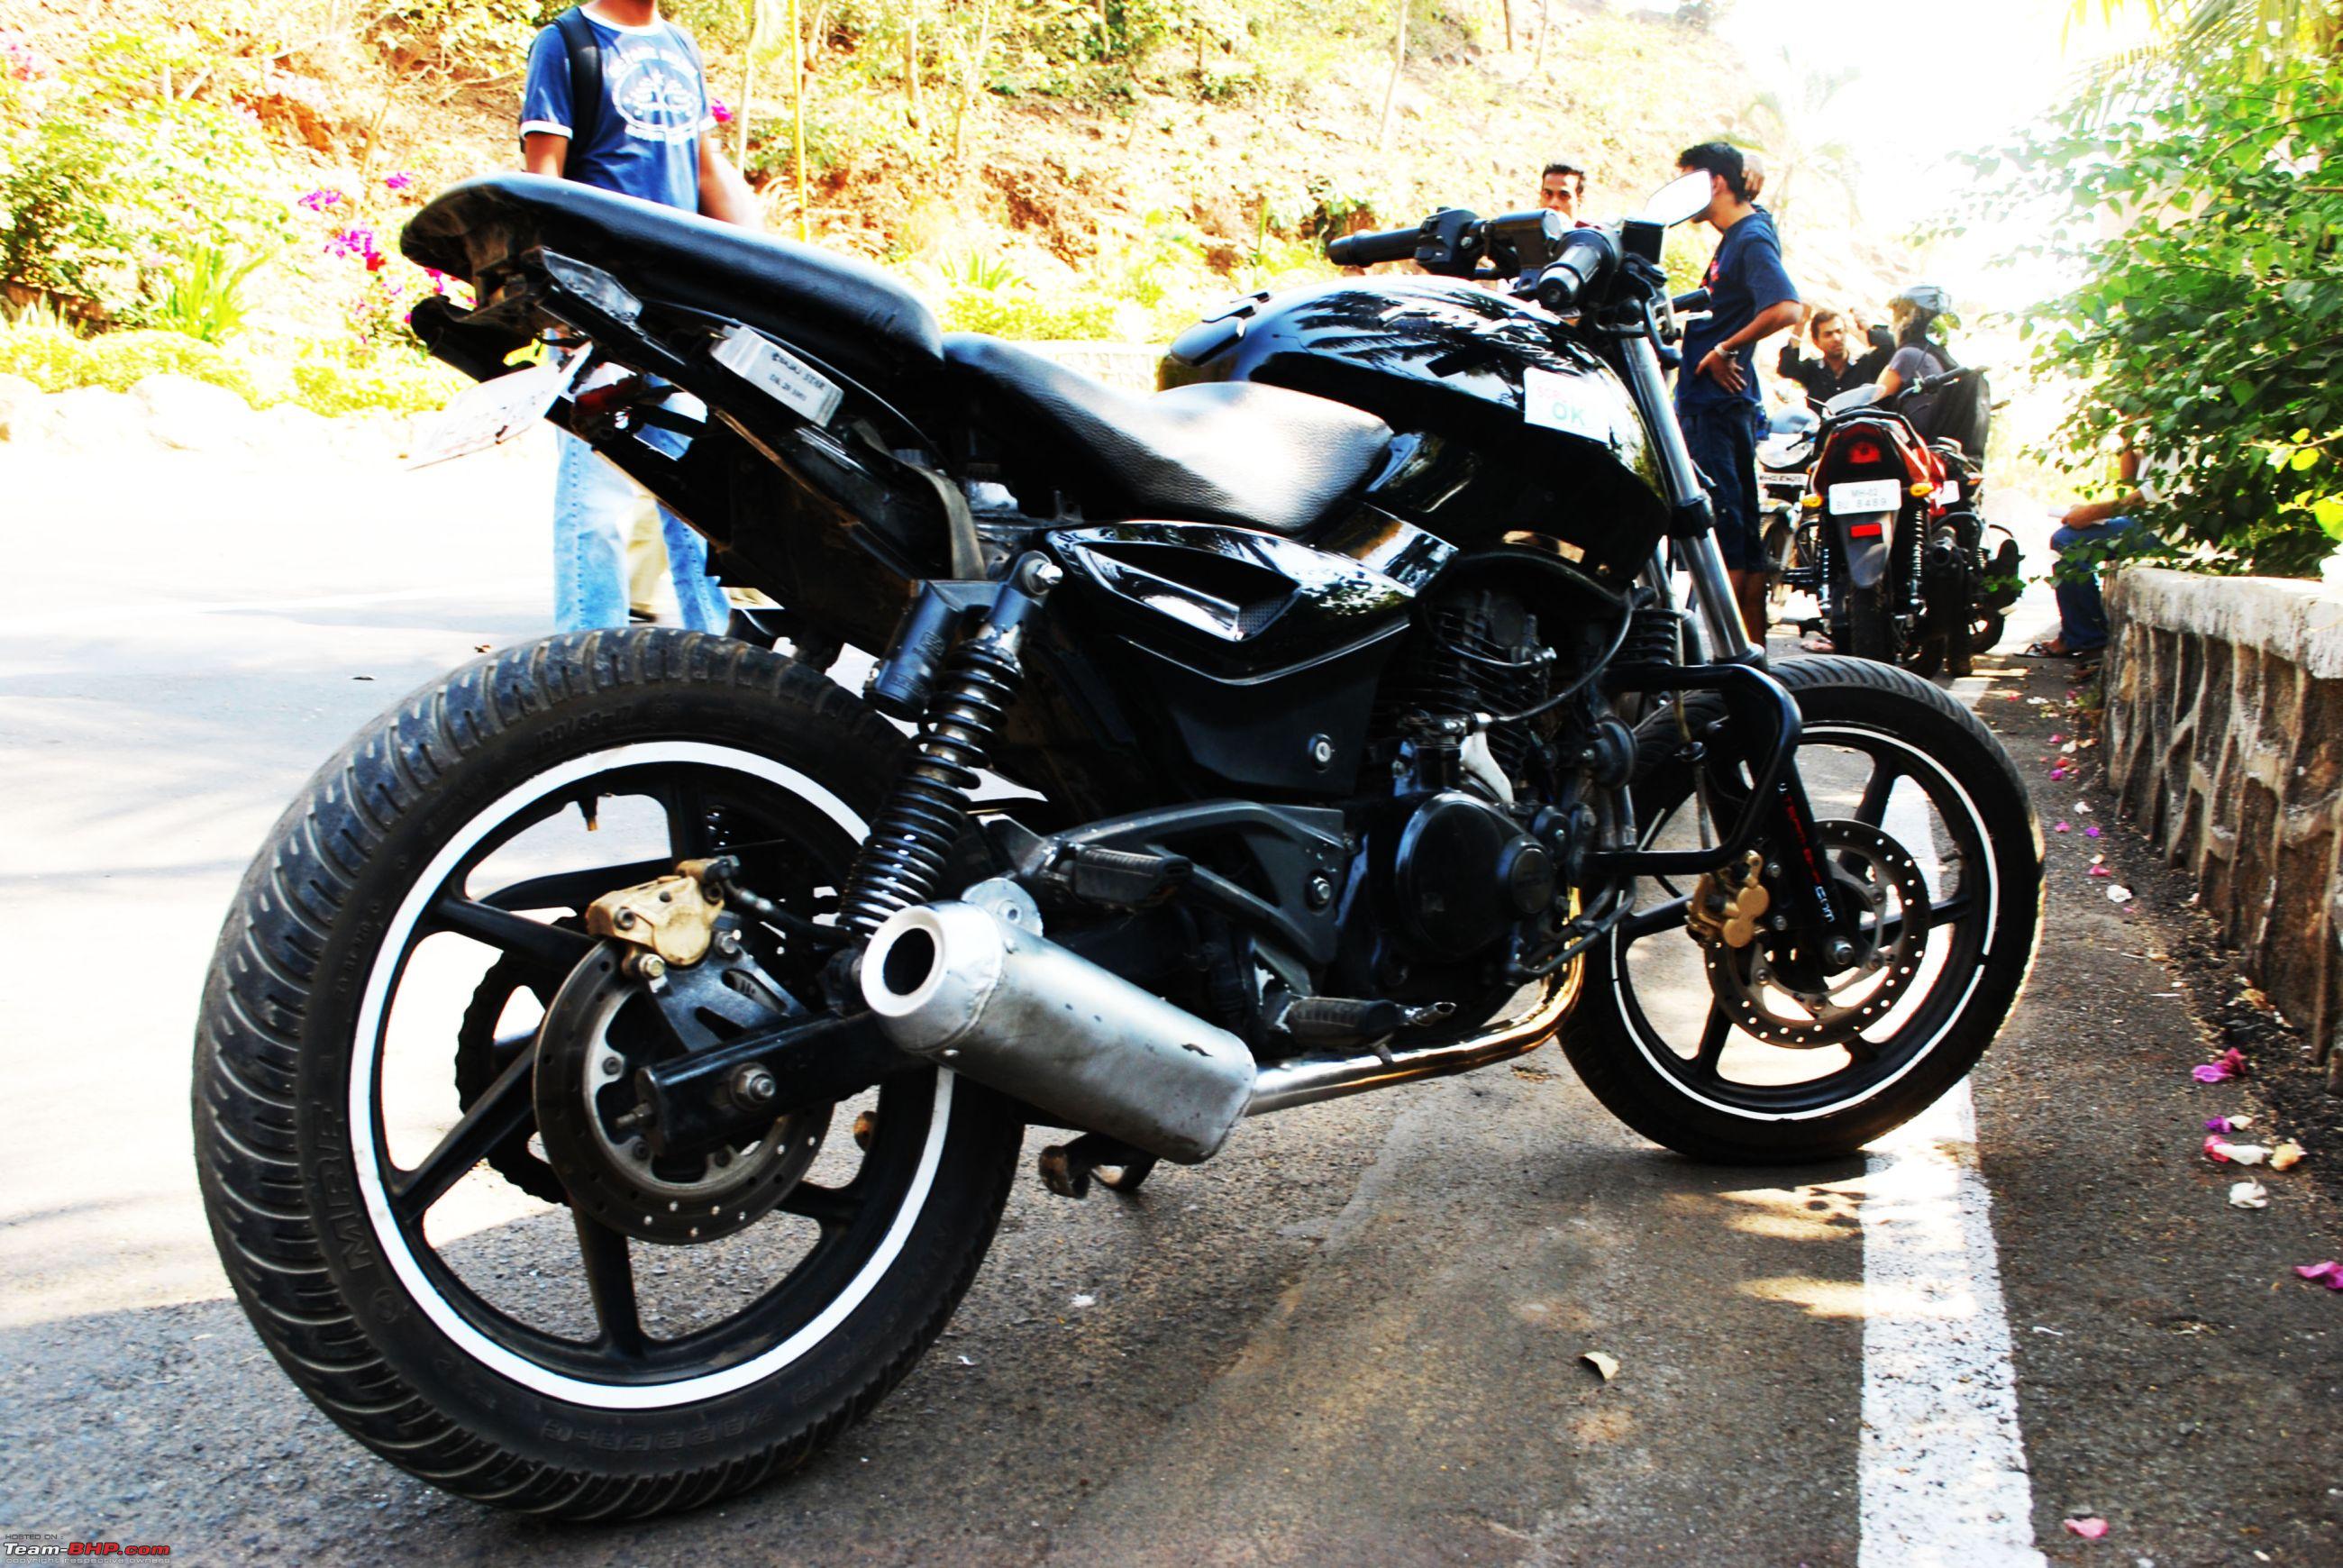 Pulsar 220 New Or The Apache Rtr 180 Edit Bought Pulsar 220